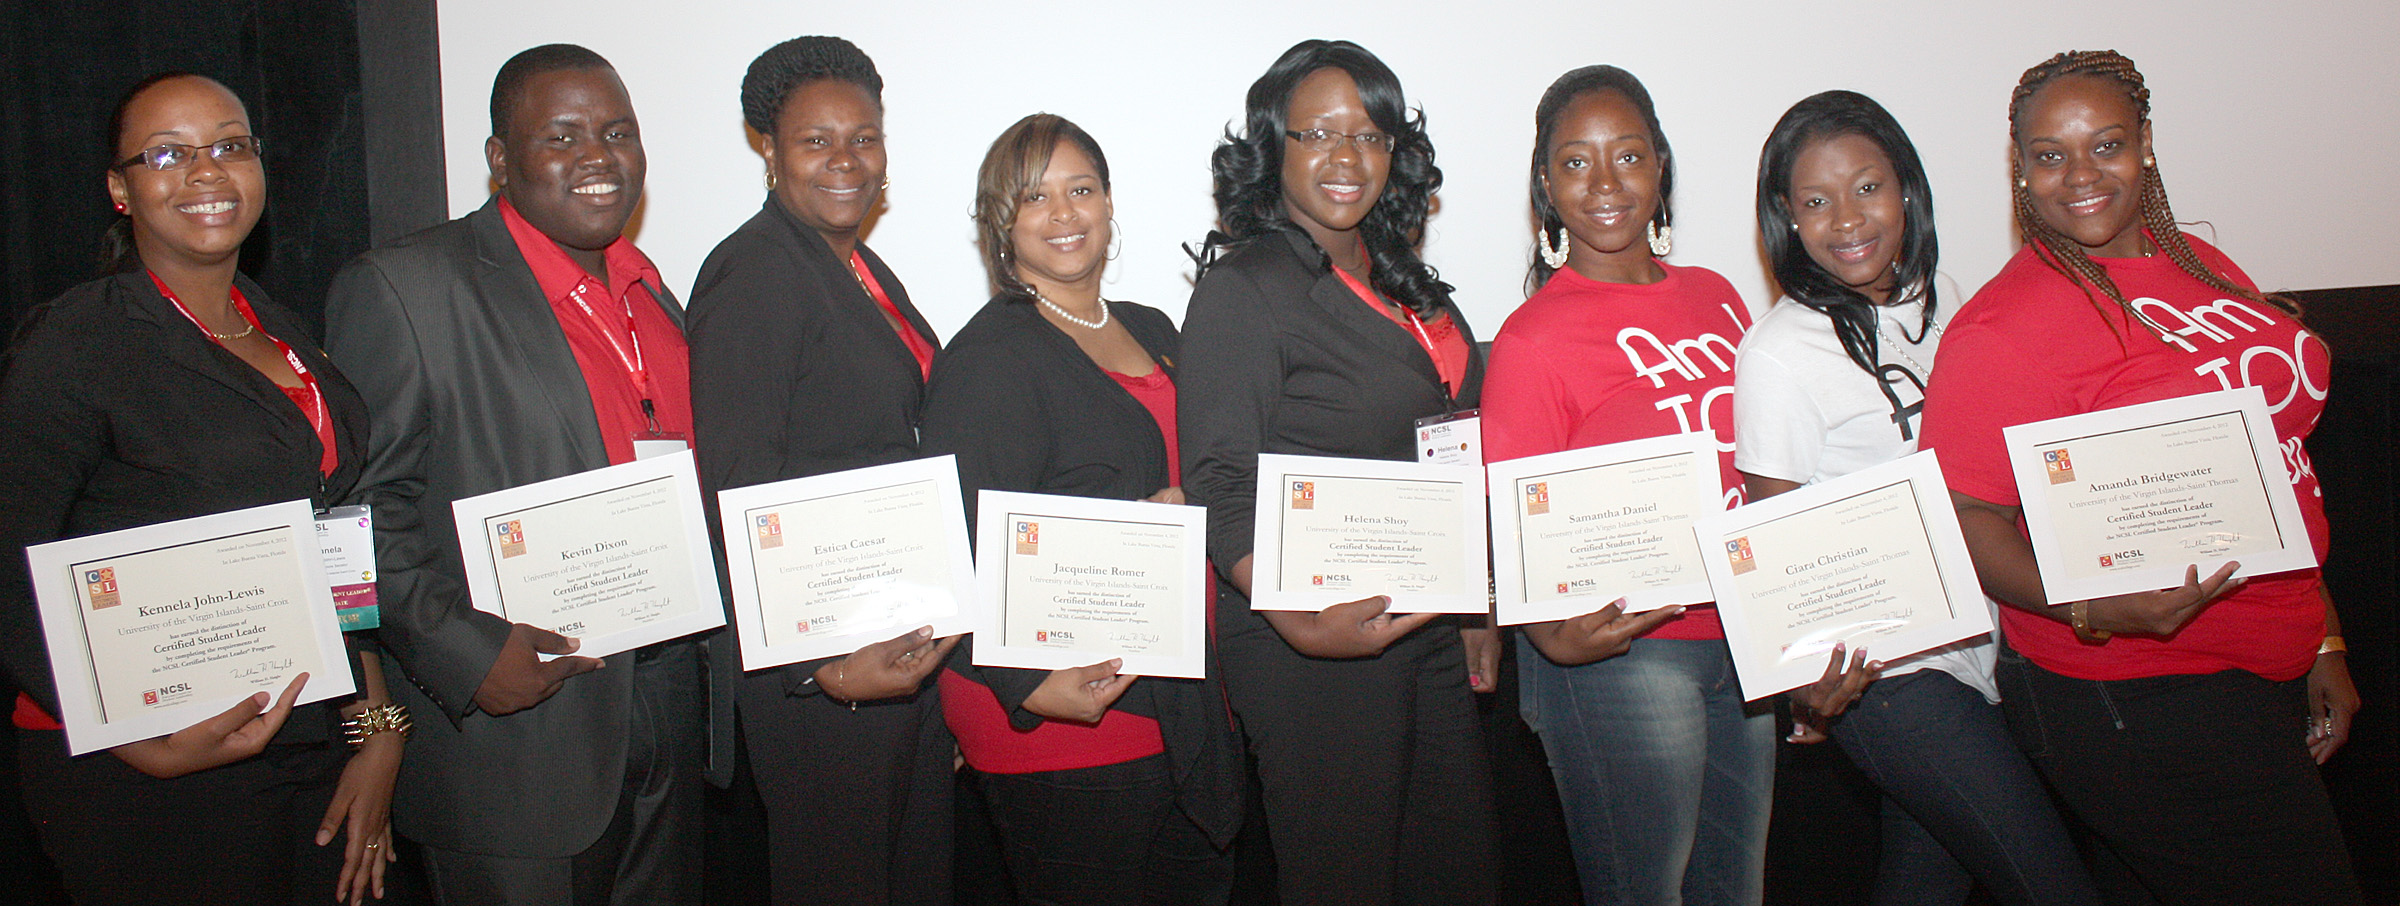 UVI students attending the National Conference on Student Leadership display their NCSL Certified Student Leader certificates. Shown, from left, are Kennela John-Lewis, St. Croix SGA President Kevin Dixon, Estica Caesar, Jacqueline Romer, Helena Shoy, Samantha Daniel, Ciara Christian and Amanda Bridgewater. St. Thomas SGA President Kimberlee Smith also earned the certification but was not present for the photo.